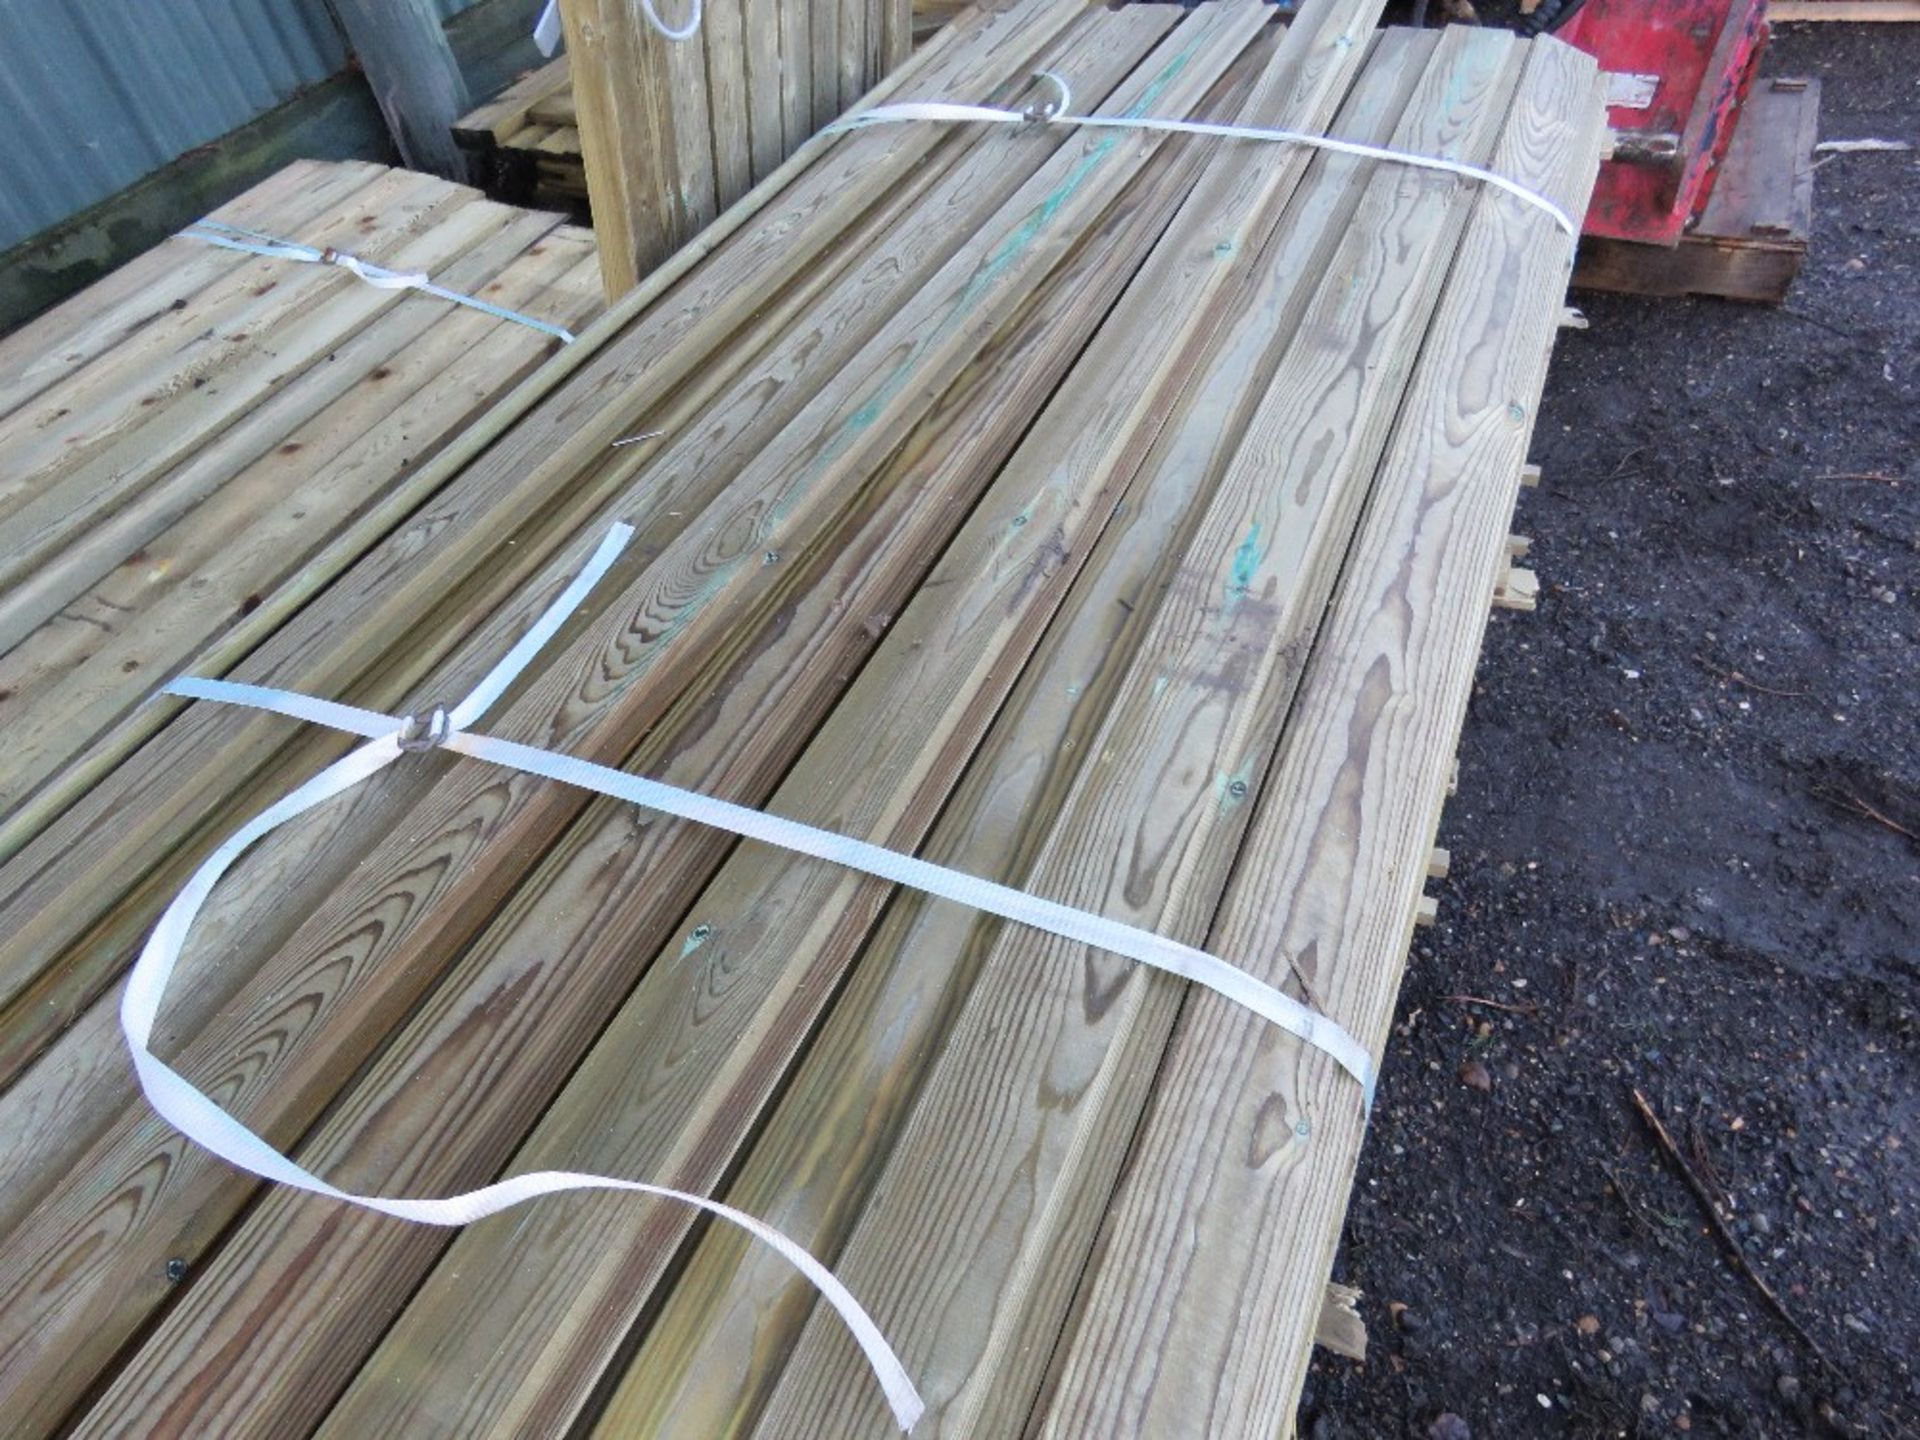 PACK OF SHIPLAP TIMBER CLADDING BOARDS, 1.83 M X 10CM WIDTH APPROX. - Image 3 of 3